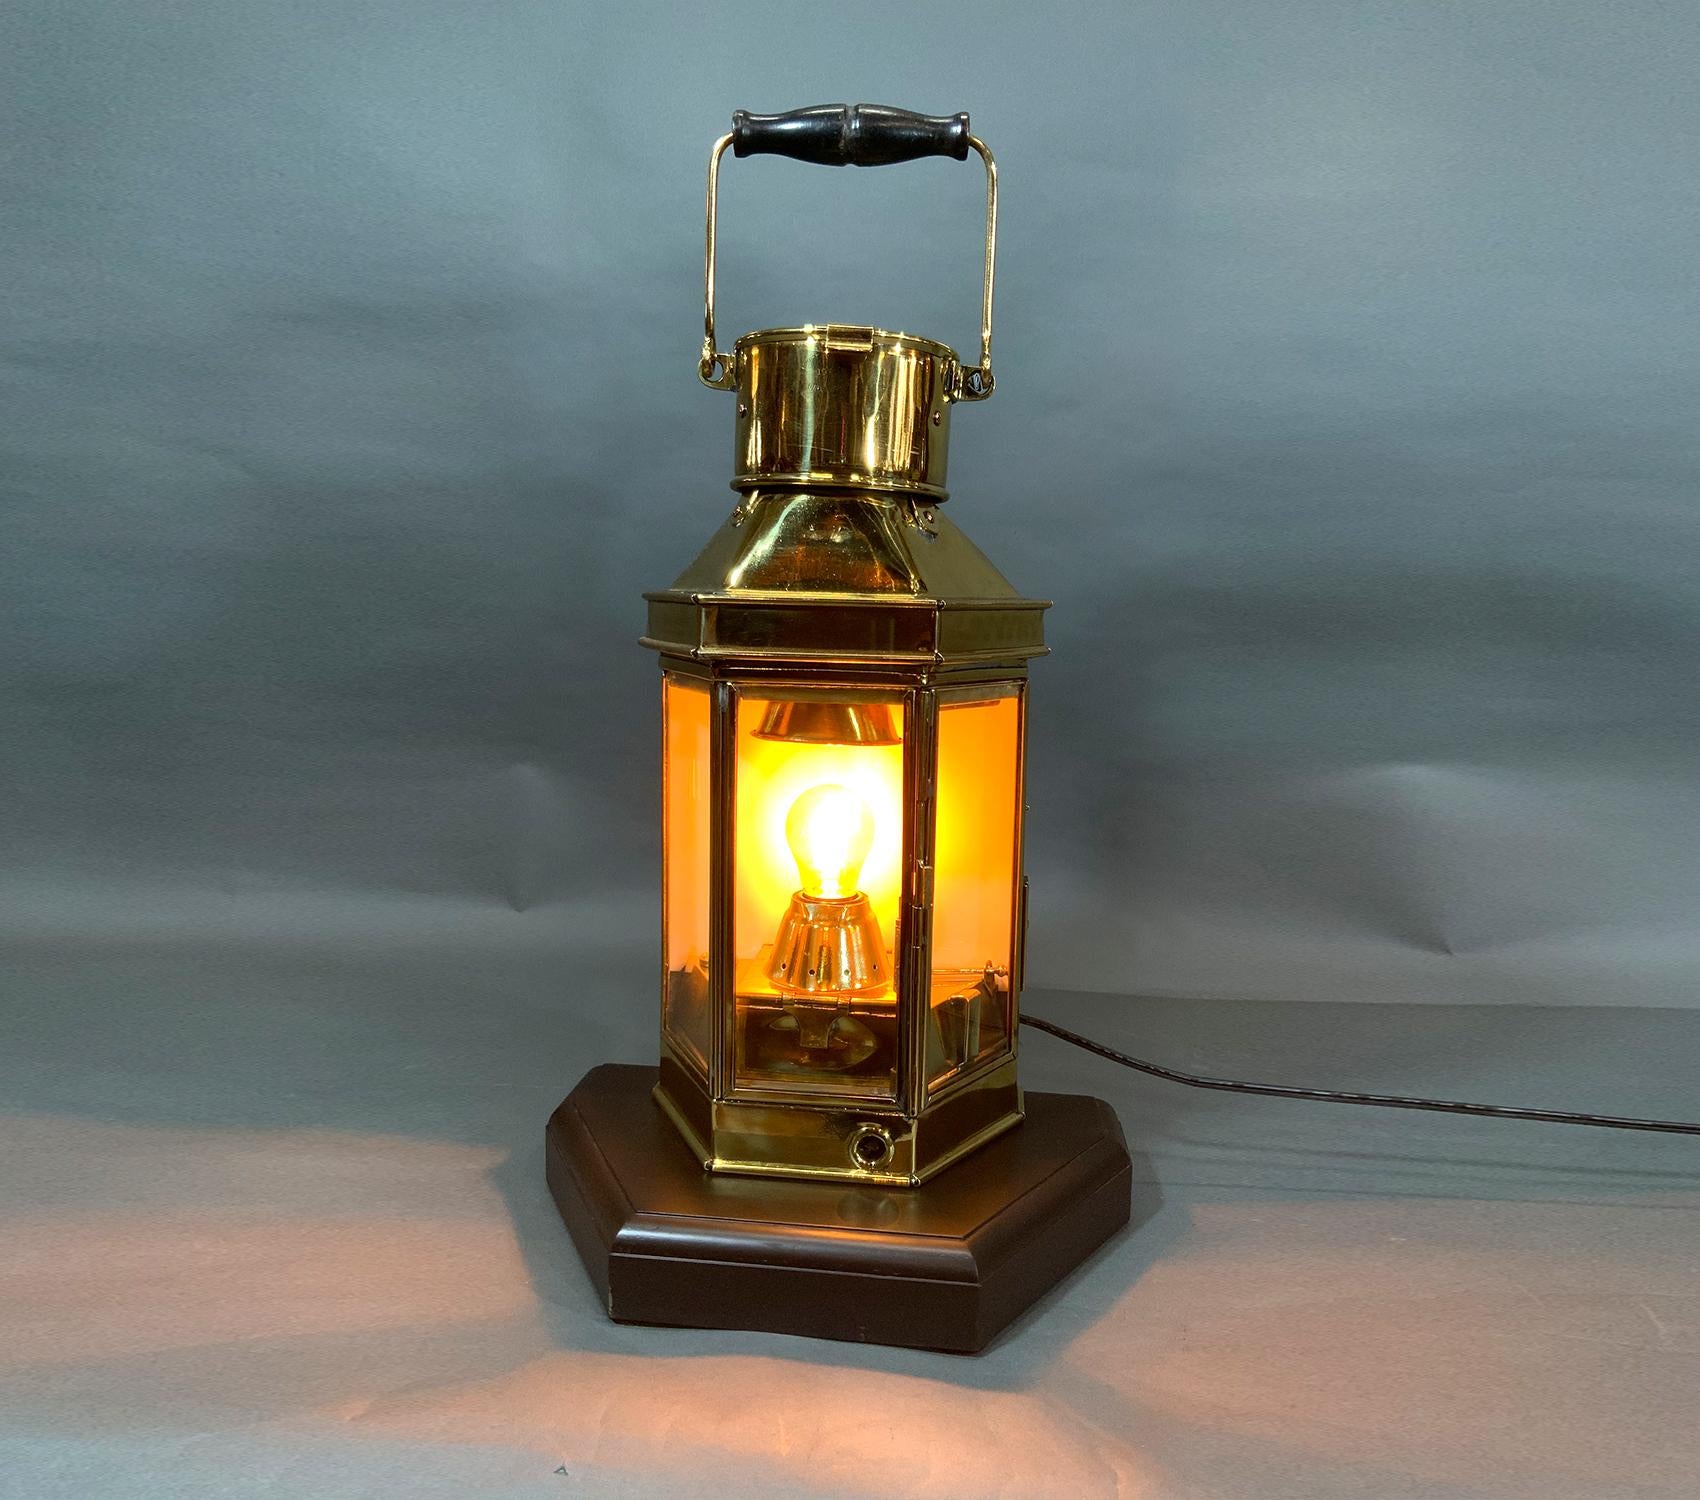 Mounted to a thick mahogany base. Fitted with a custom electric socket into the original oil burner. Choice restoration of a spectacular lantern.

Weight: 13 LBS
Overall Dimensions: 18